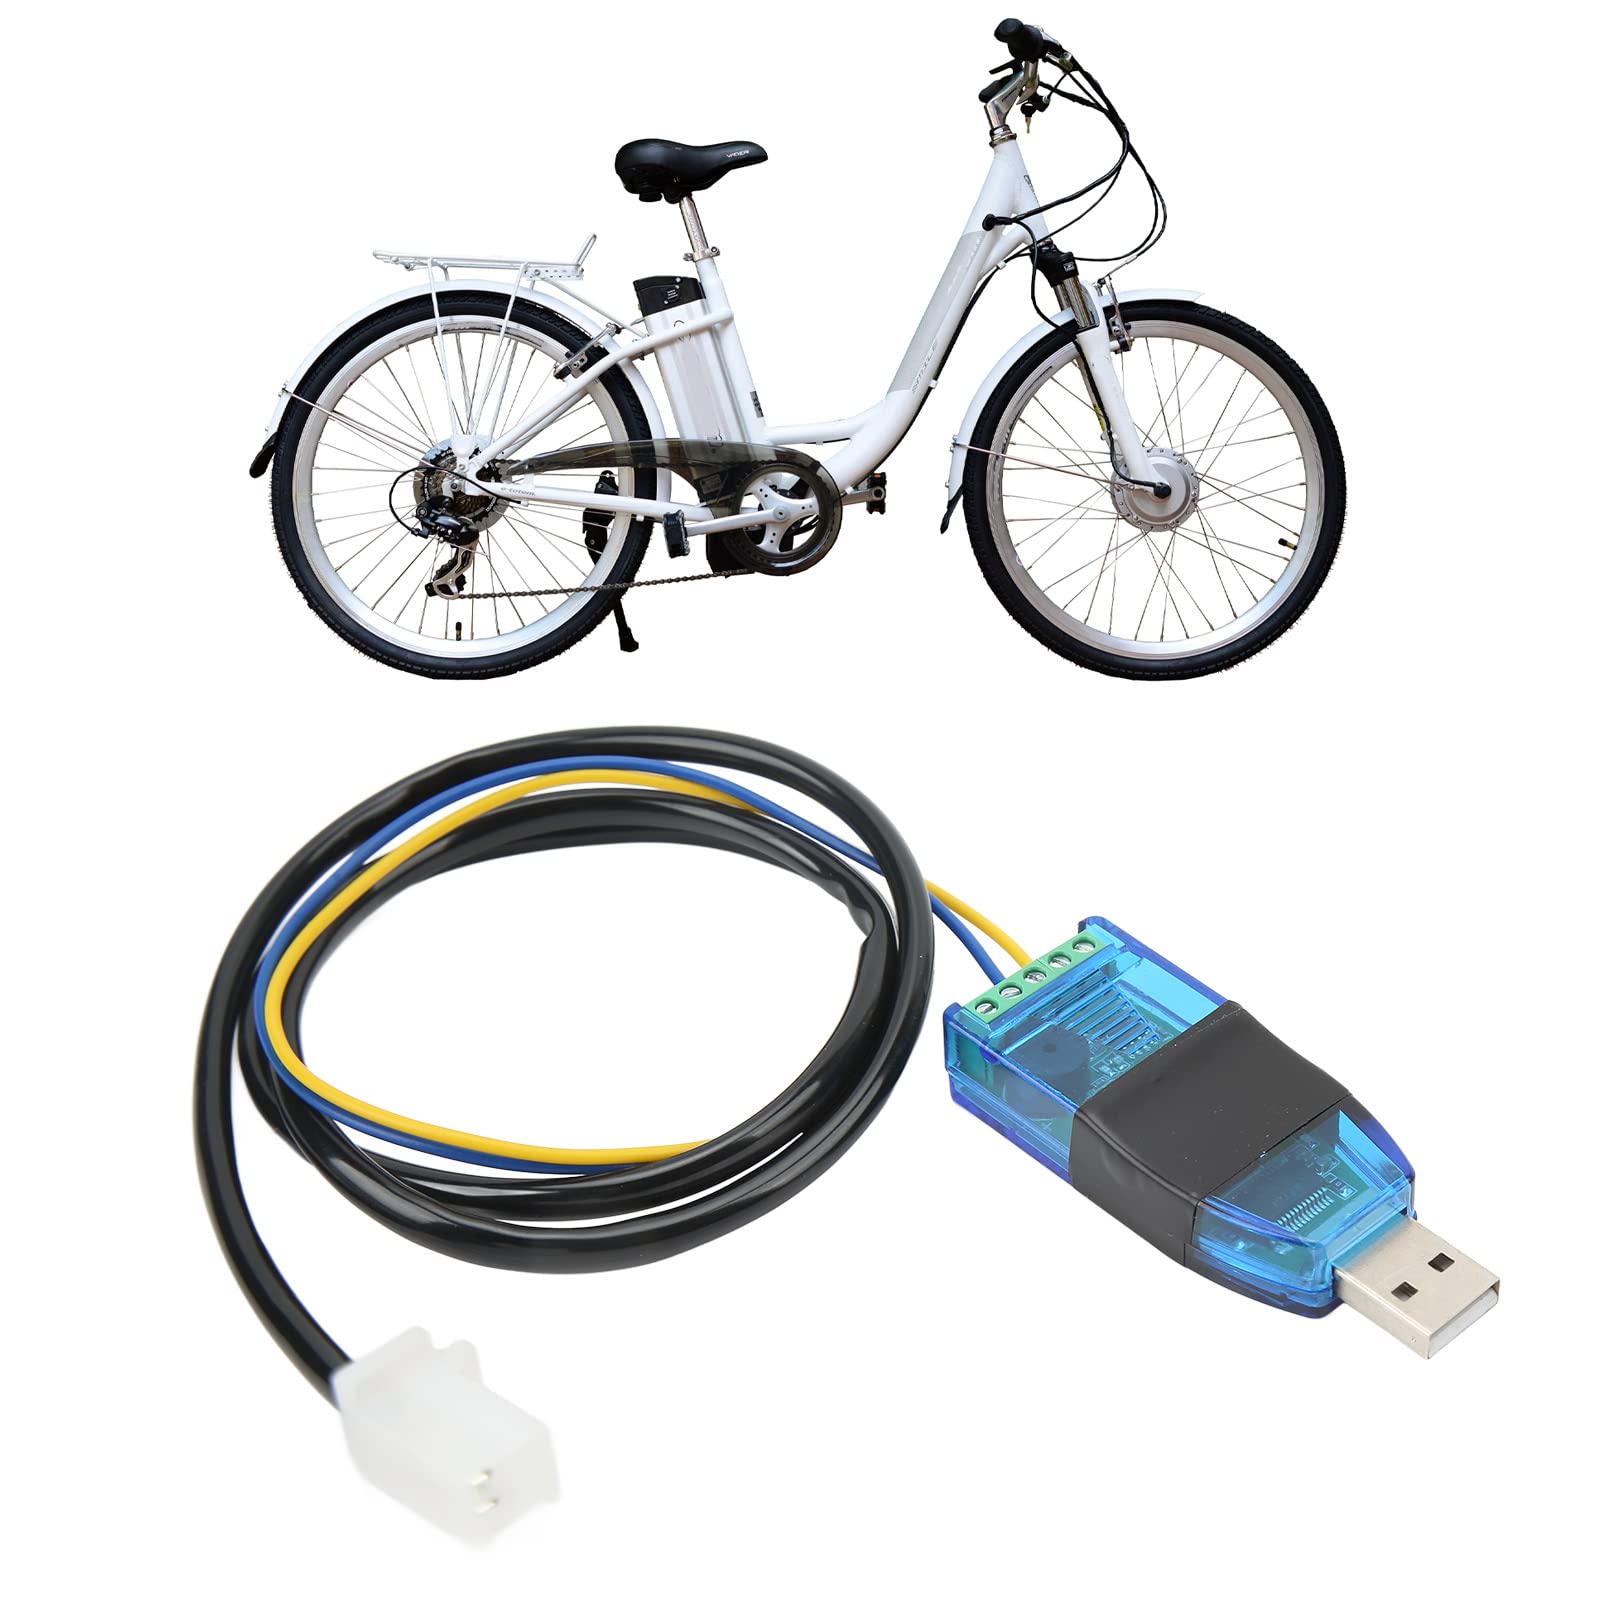 Programmable USB Cable, Electric Bike Programmable USB Data Cable Baud Rate 115200 Fit for VOTOL Controller EM 150/2 200/2